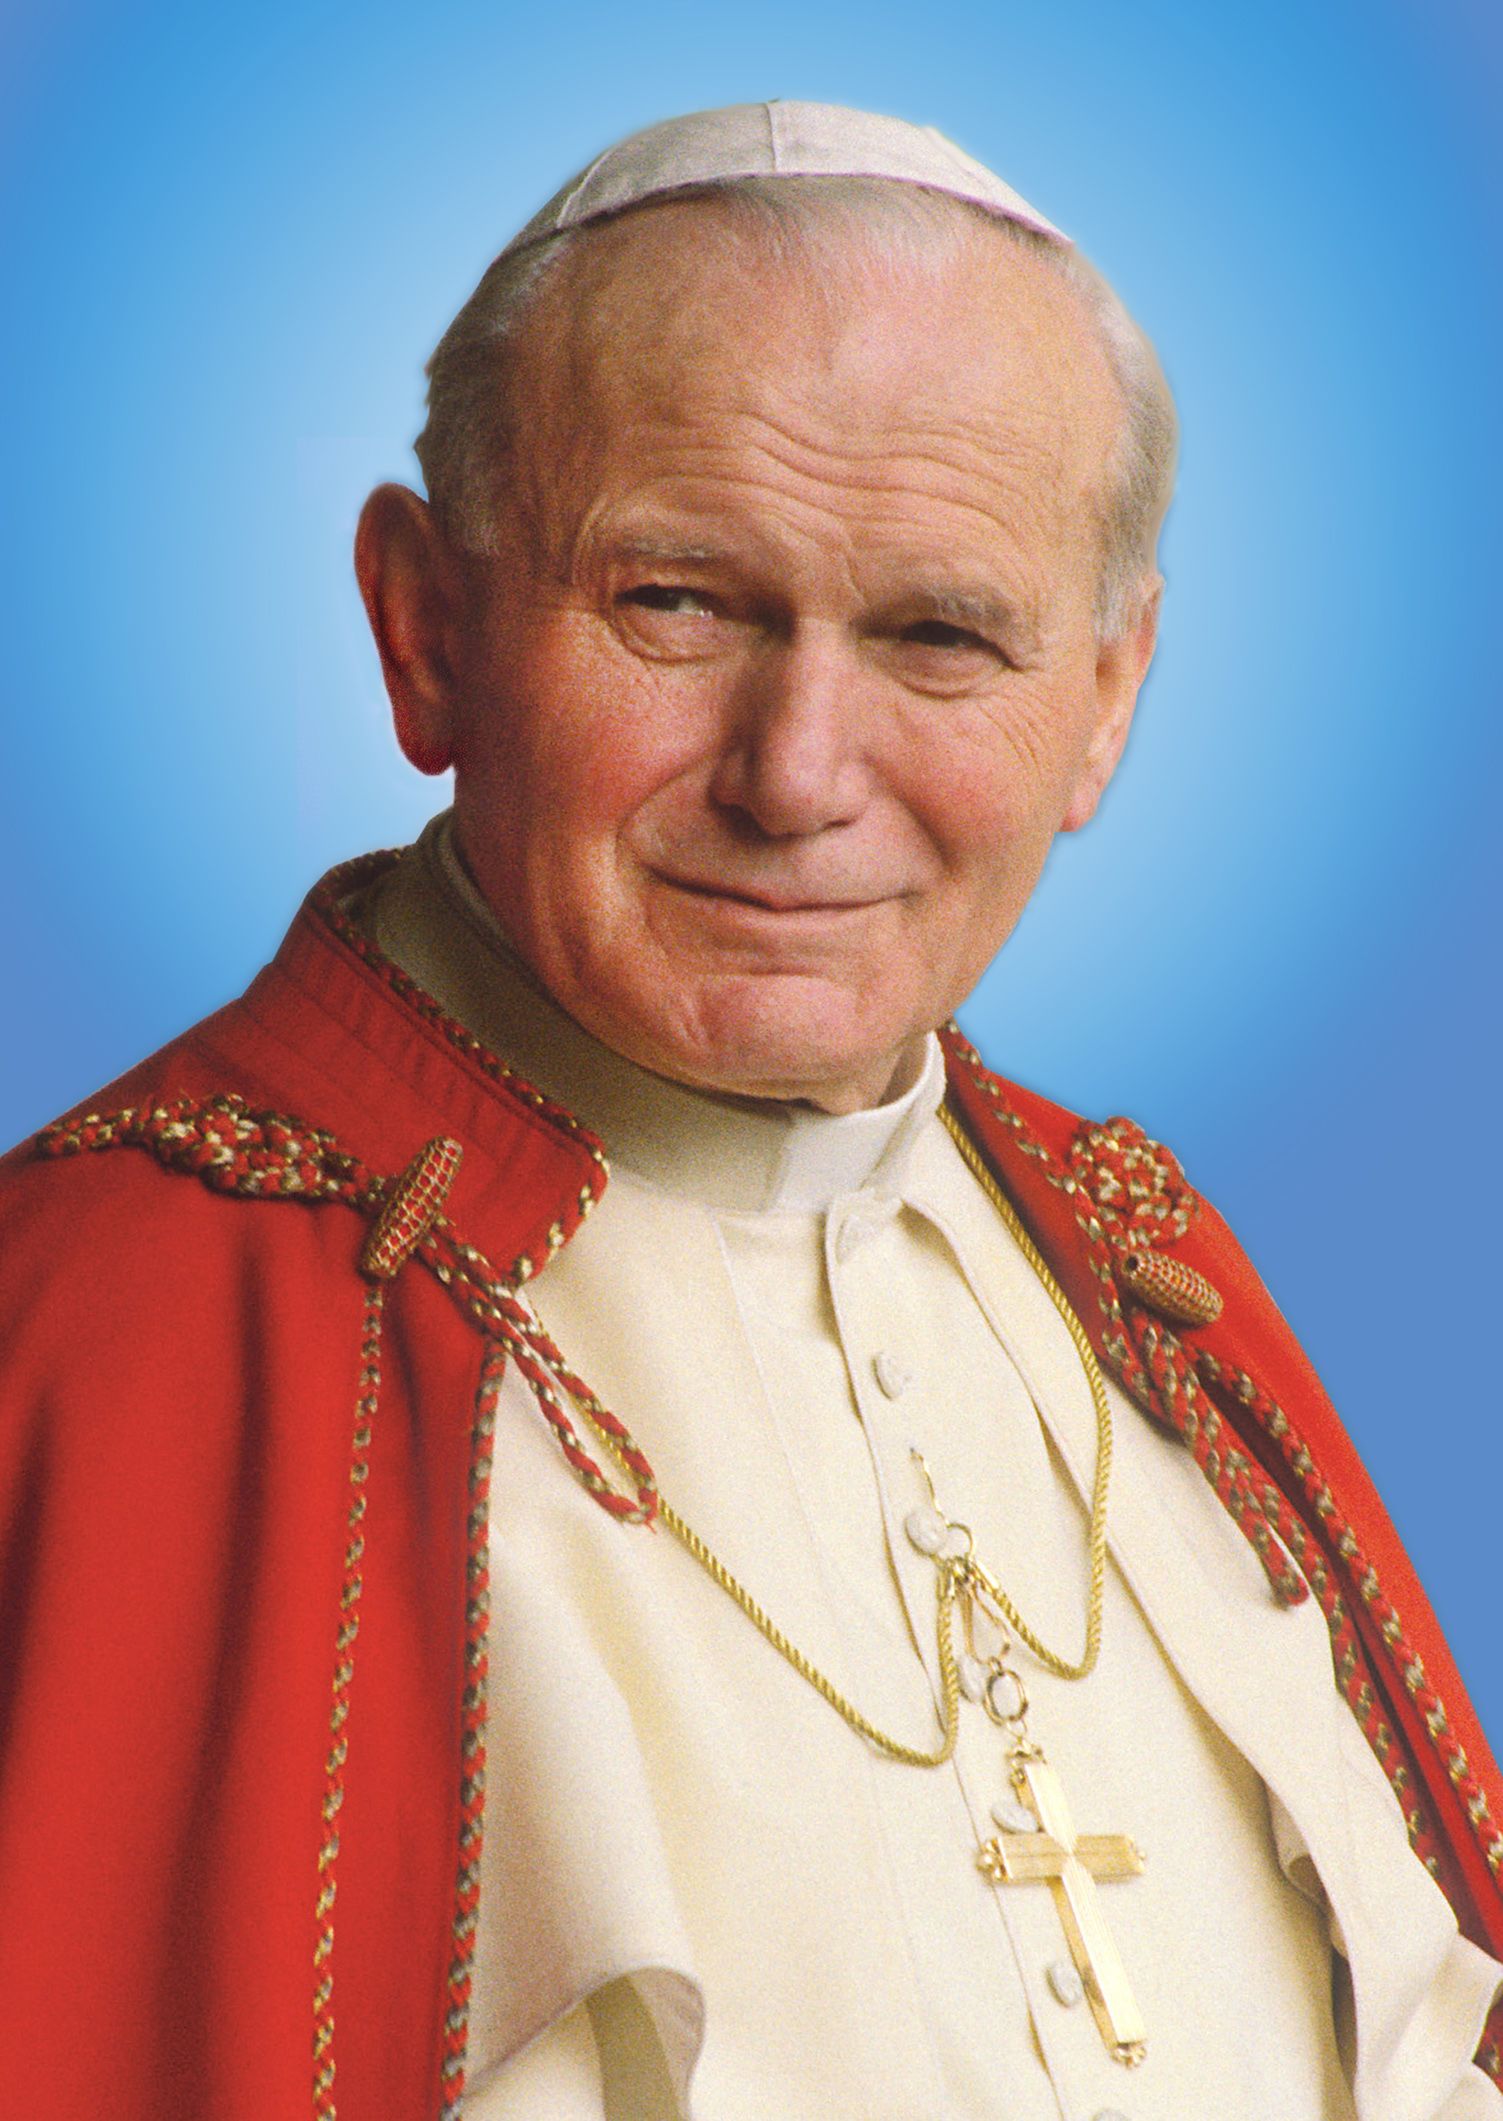 POPE JOHN PAUL II SEEN IN IMAGE RELEASED BY POSTULATION OF SAINTHOOD CAUSE